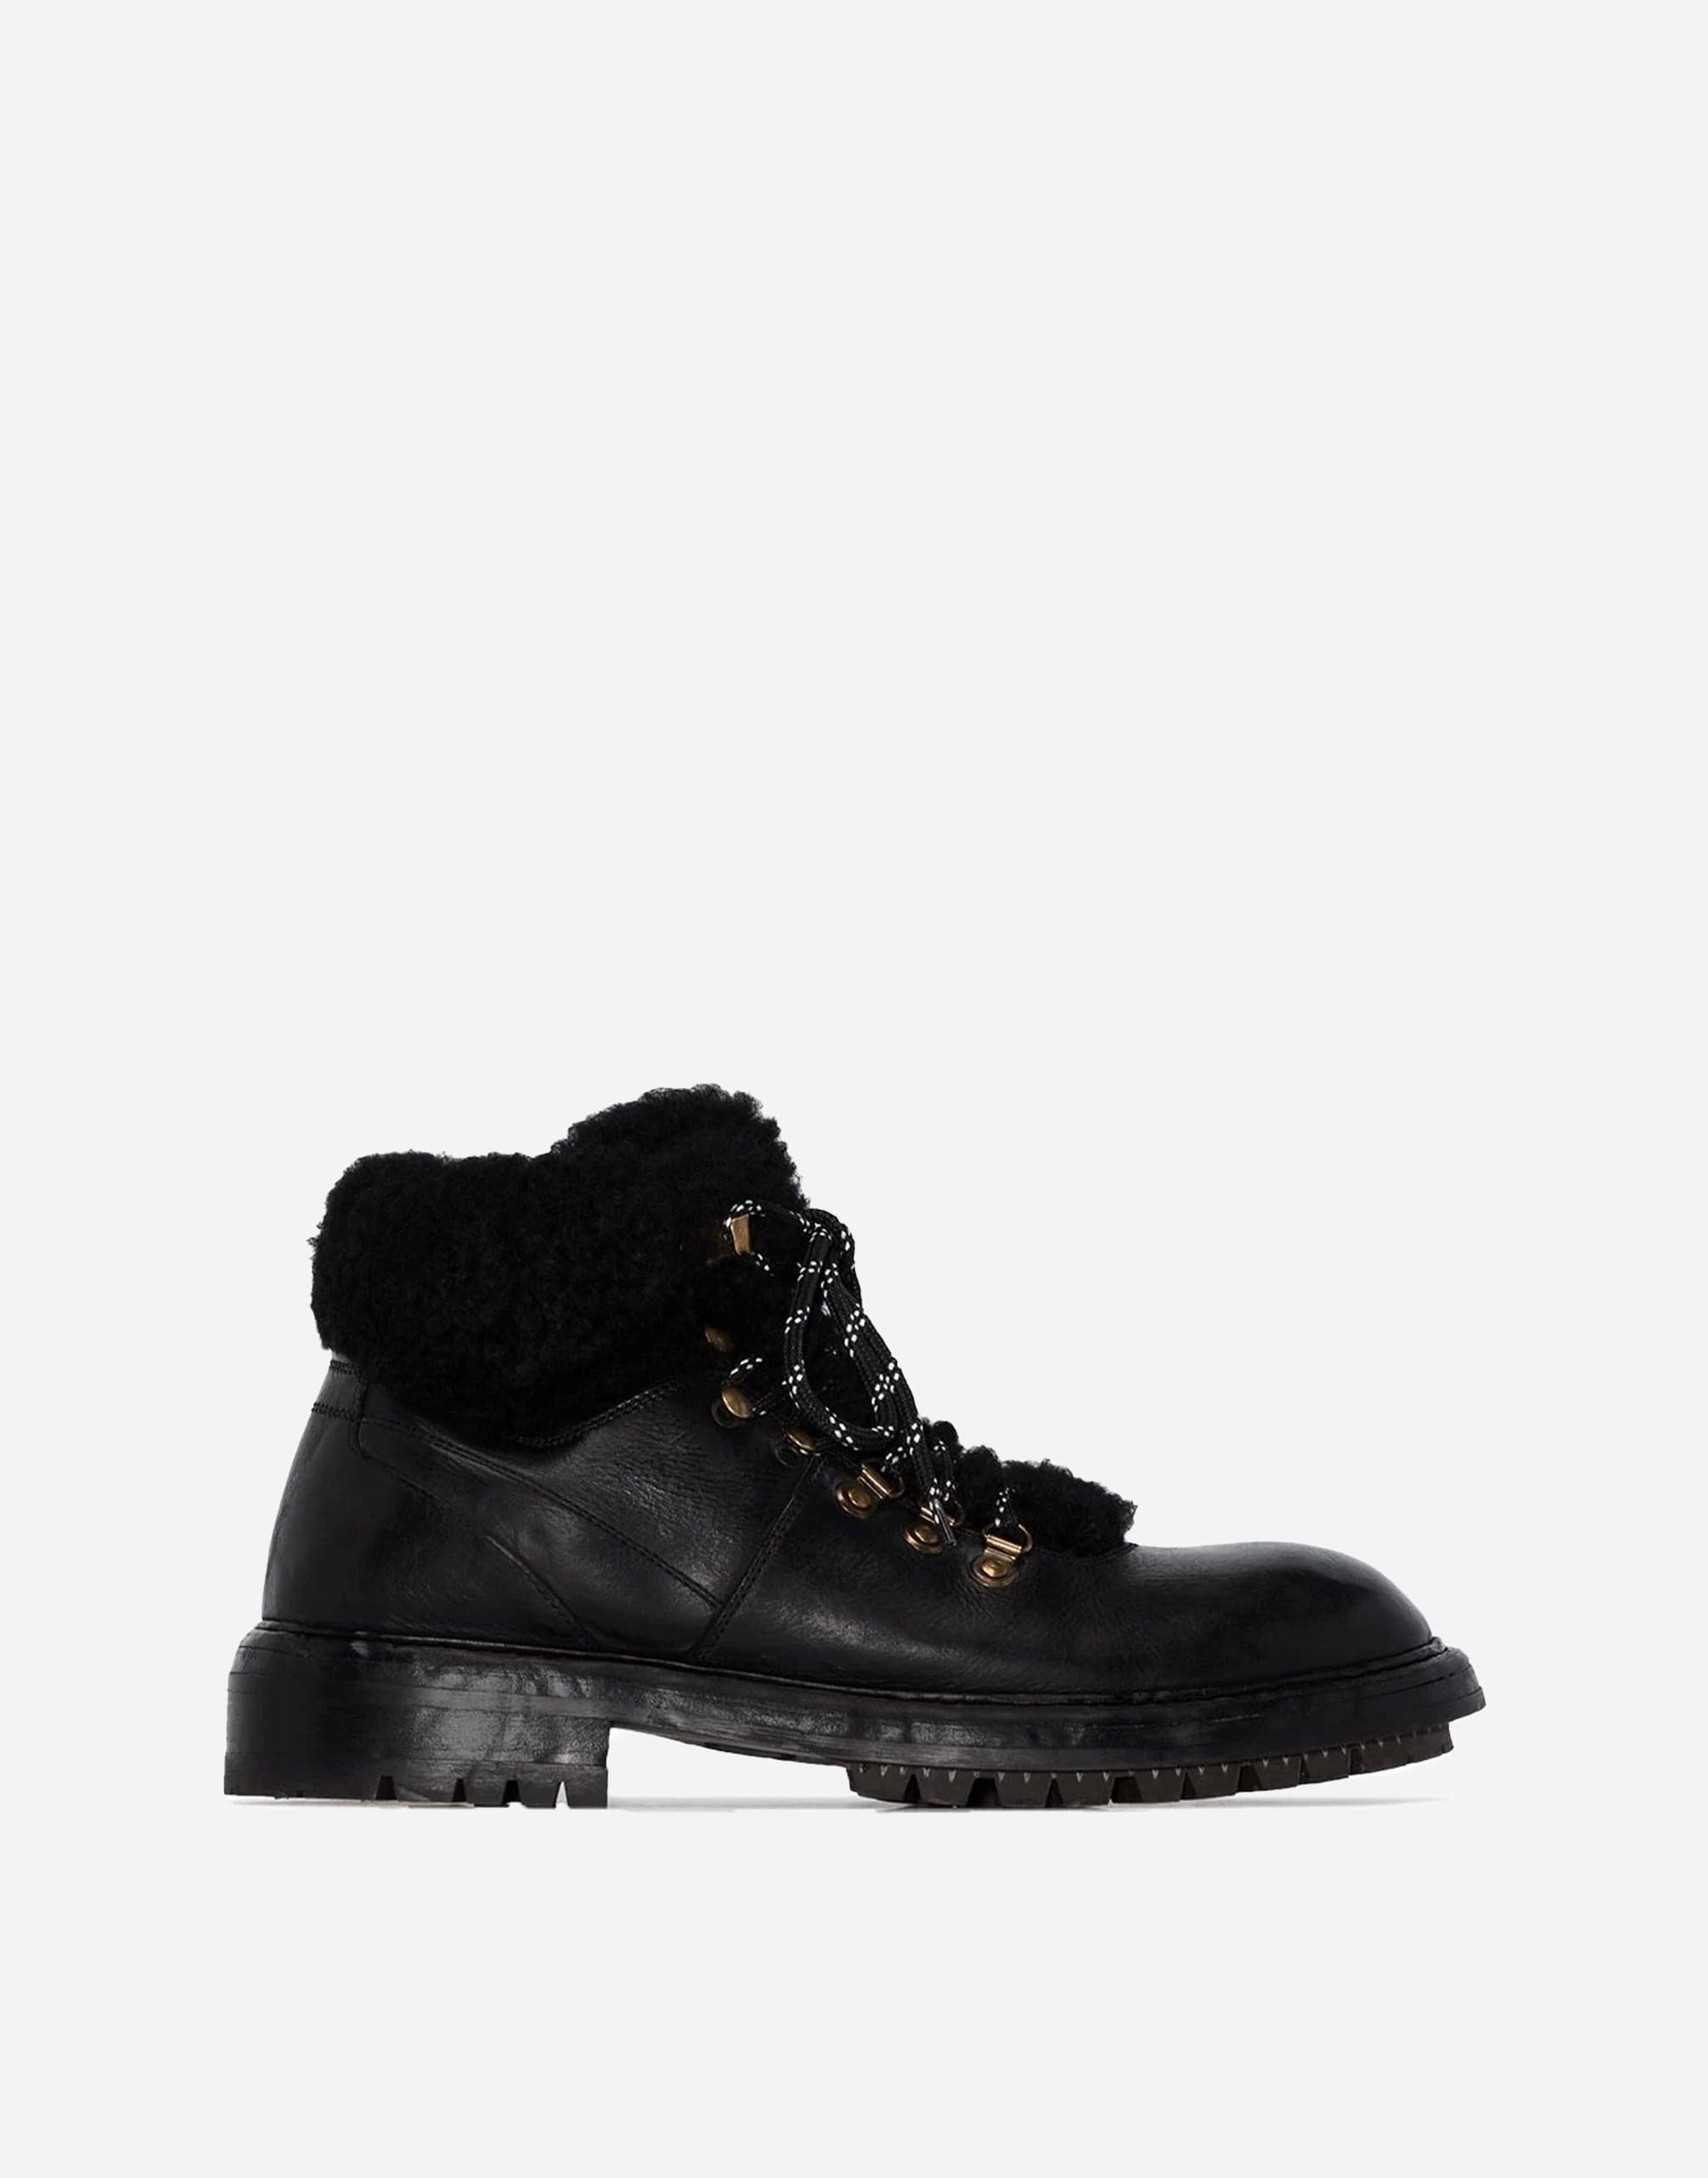 Dolce & Gabbana Fur Lined Hiking Boots